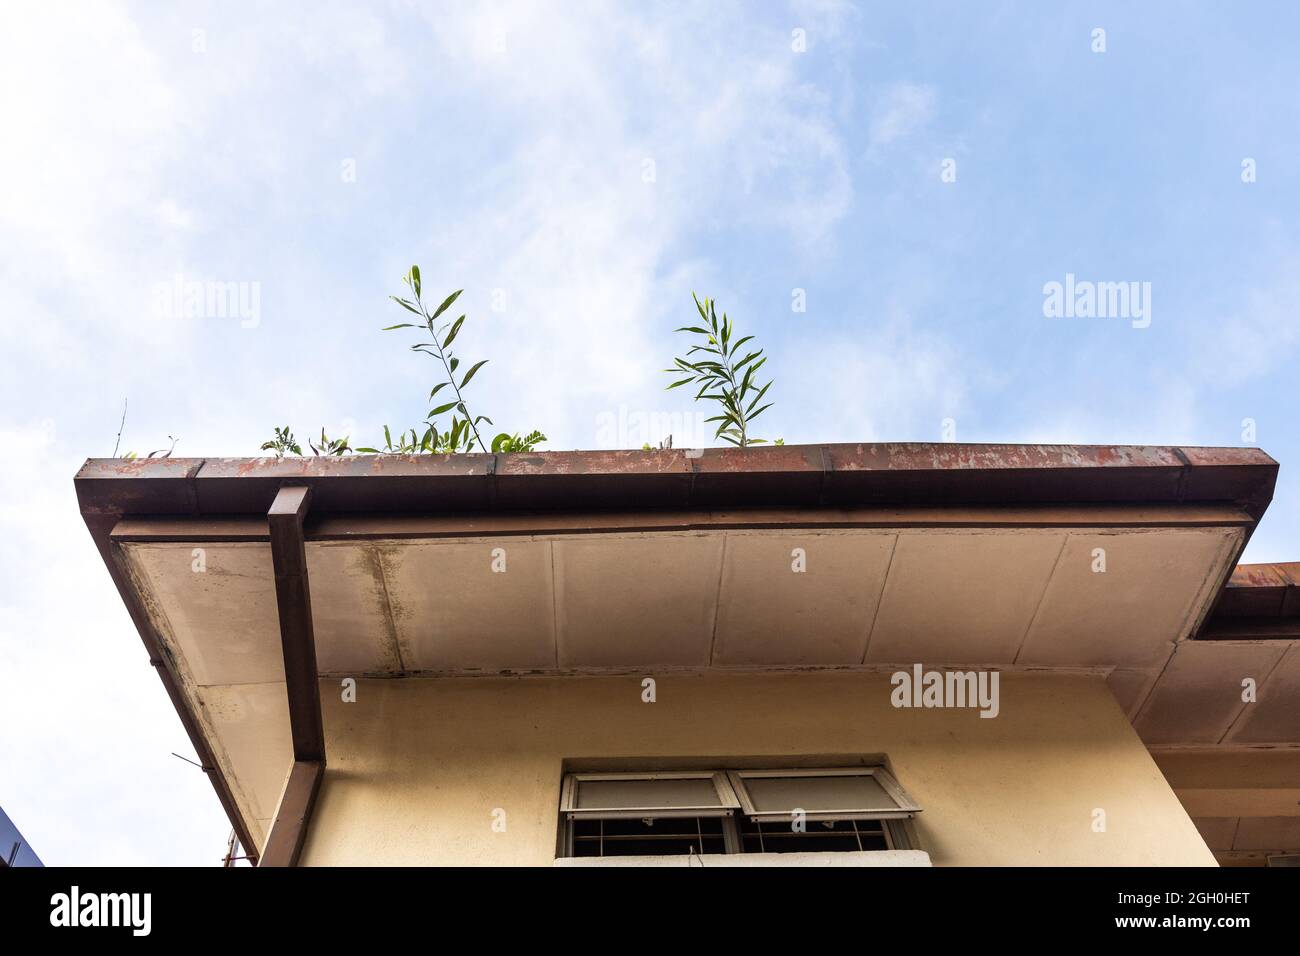 Clogged roof rain gutter full of dry leaf and plant growing in it against blue sky Stock Photo